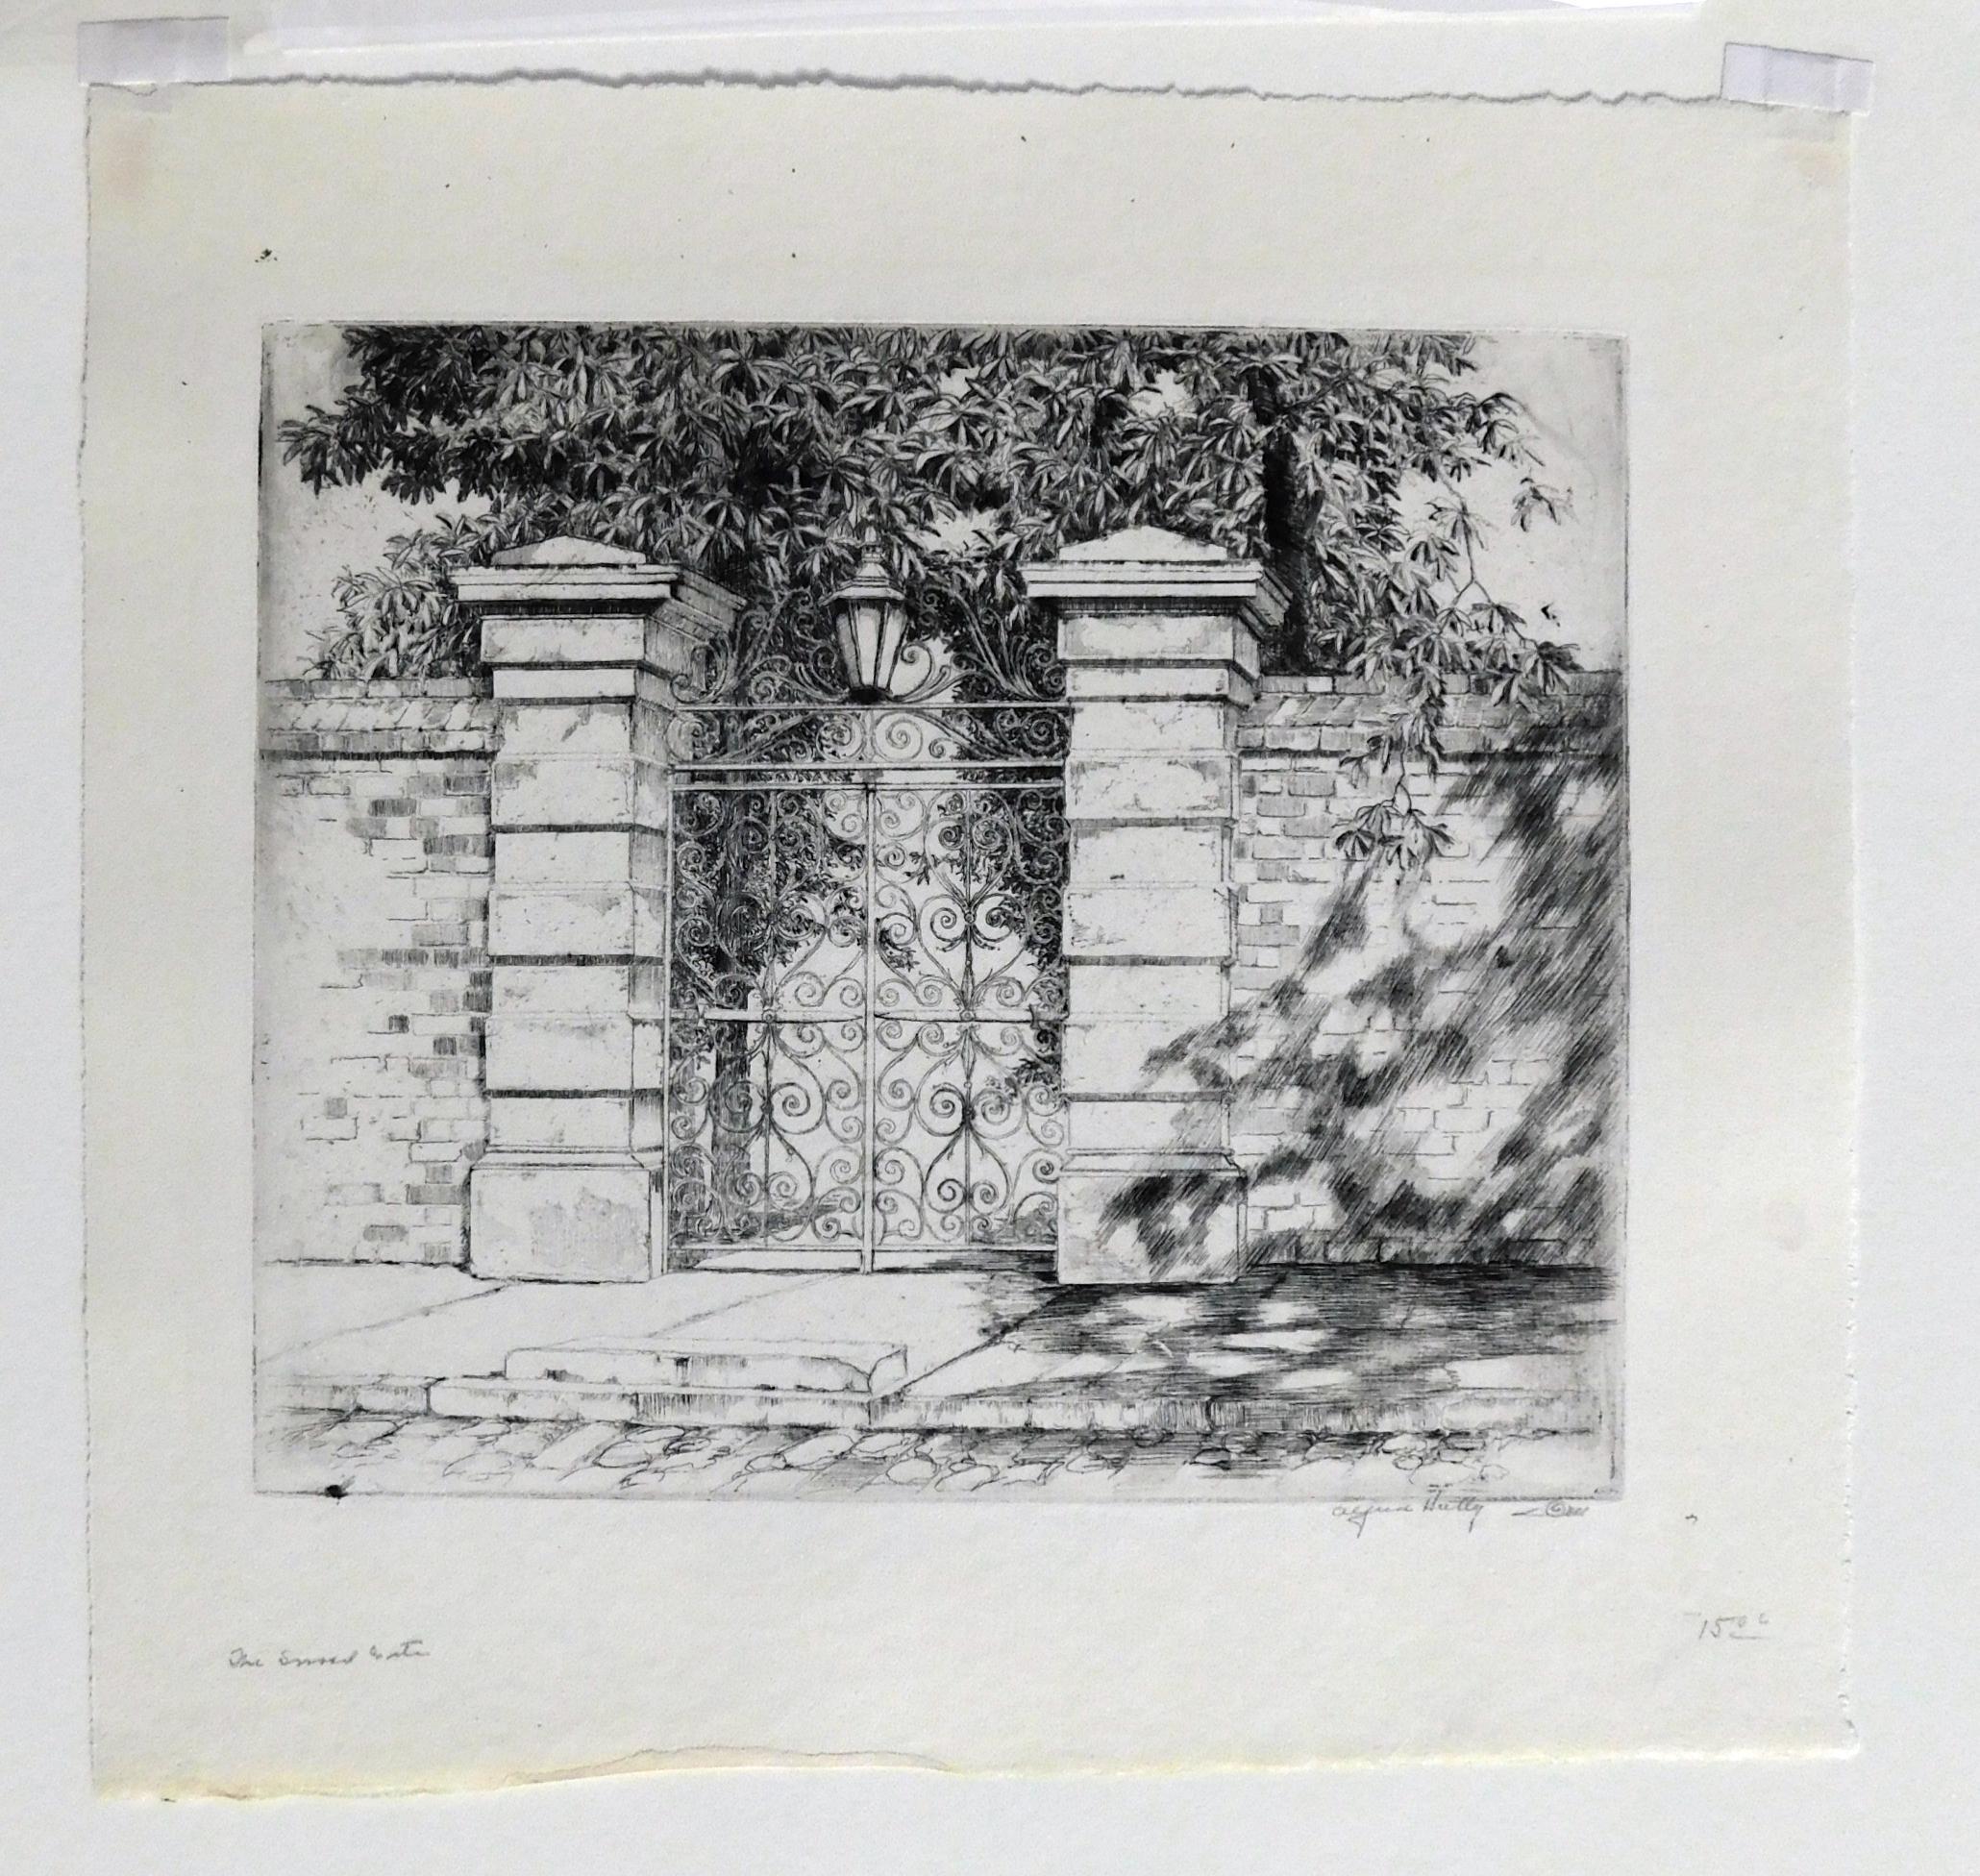 Original etching of a scene from Charleston, South Carolina by New York/Charleston artist Alfred Heber Hutty (1877-1954).
Signed in pencil lower right “Alfred Hutty,” includes the snail cipher. Titled “The Sword Gate” lower left margin.
Image